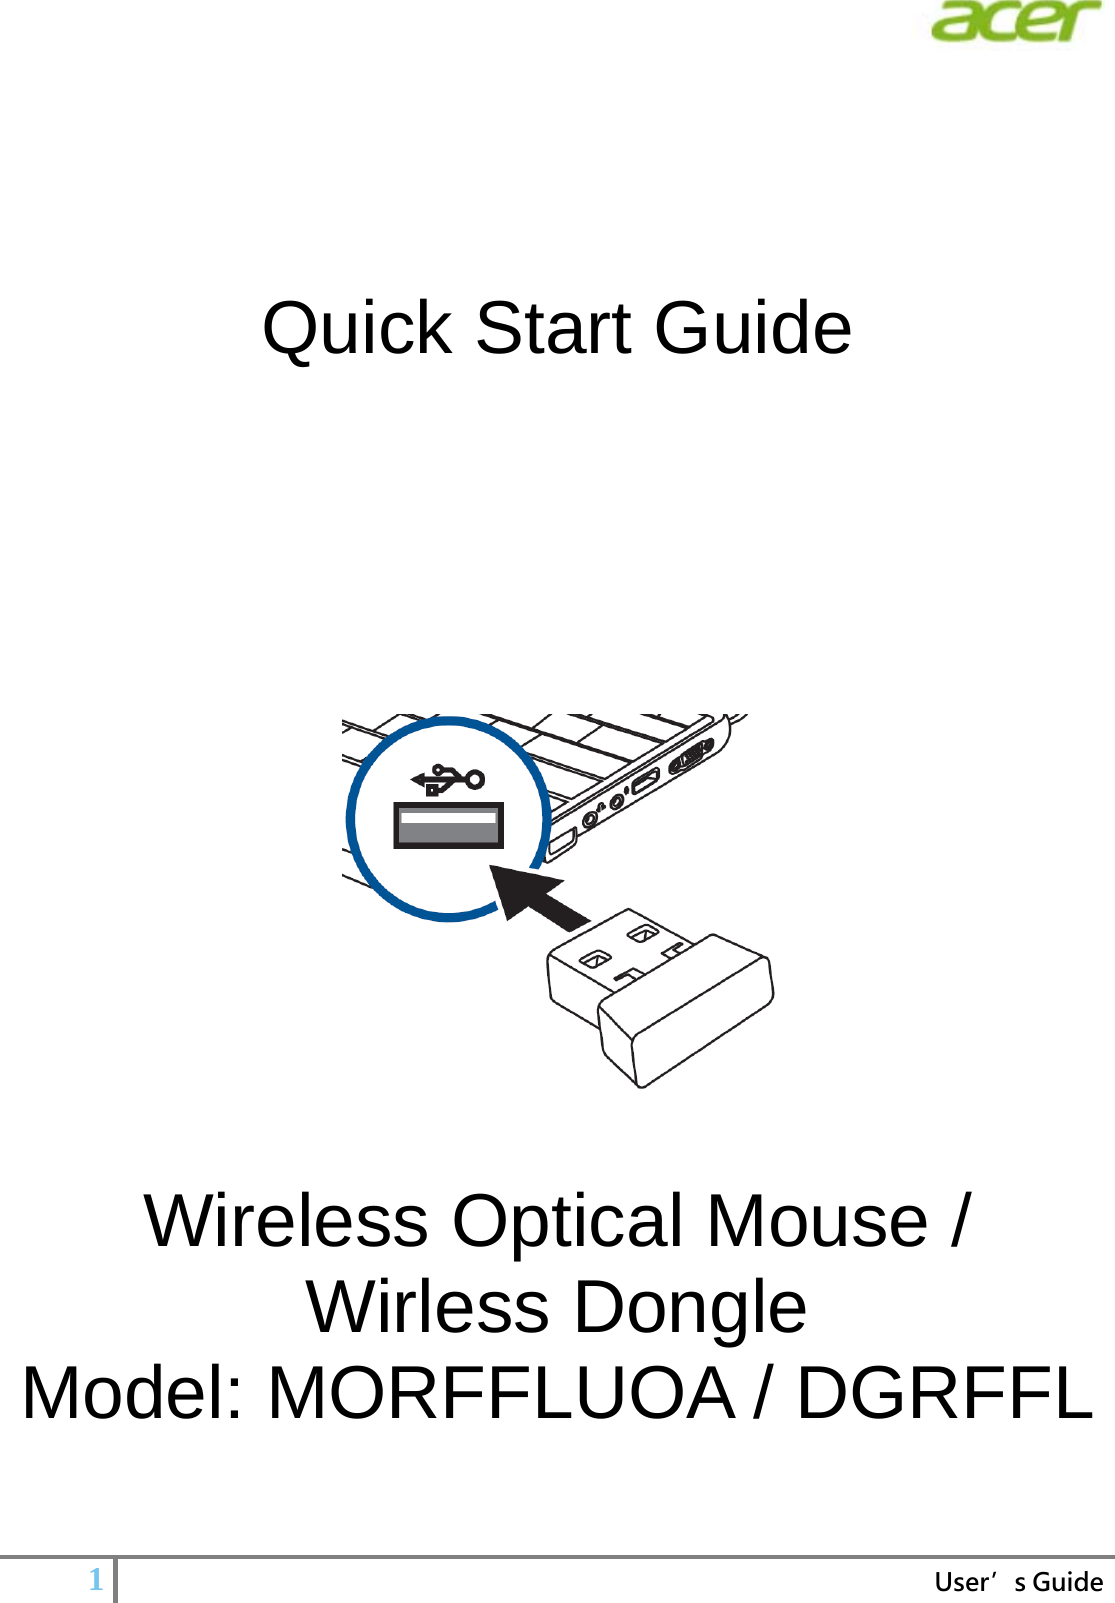   1  User’s Guide         Quick Start Guide       Wireless Optical Mouse /   Wirless Dongle Model: MORFFLUOA / DGRFFL   